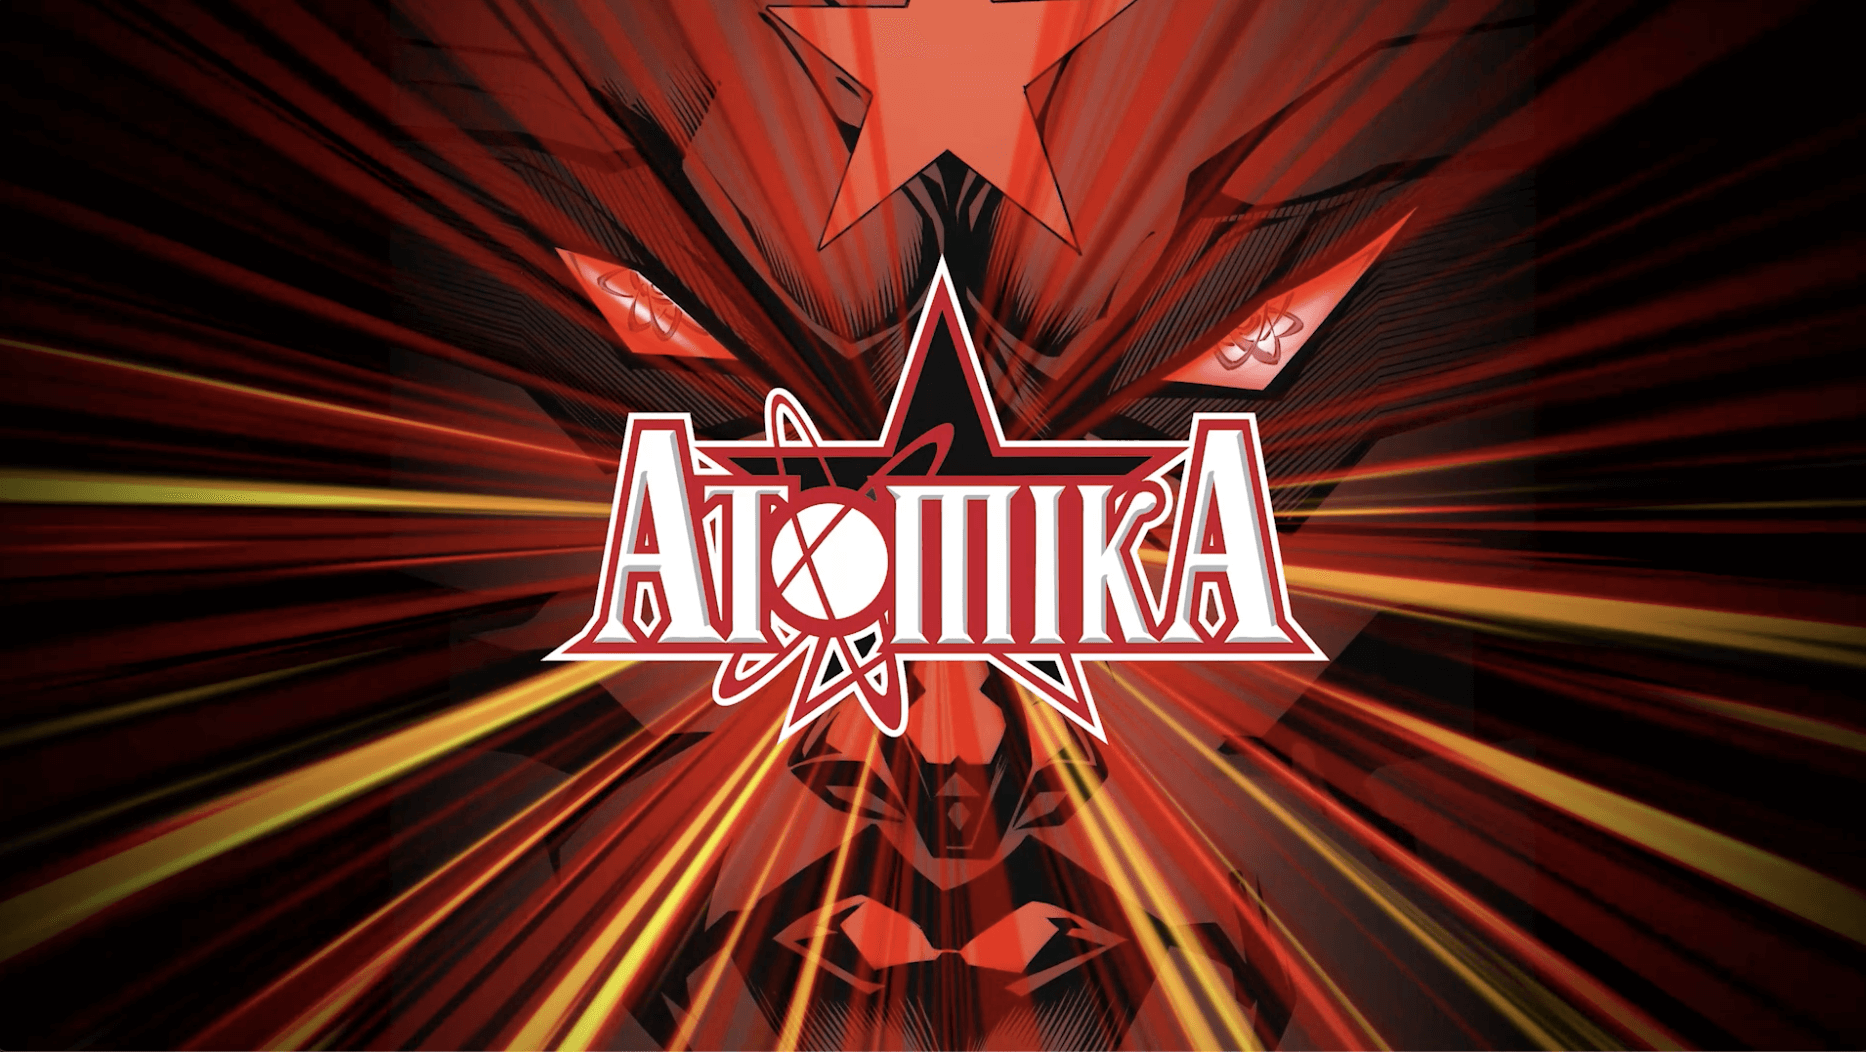 The words "Atomika: God Is Red " over the imposing face of a powerful god who looks very angry